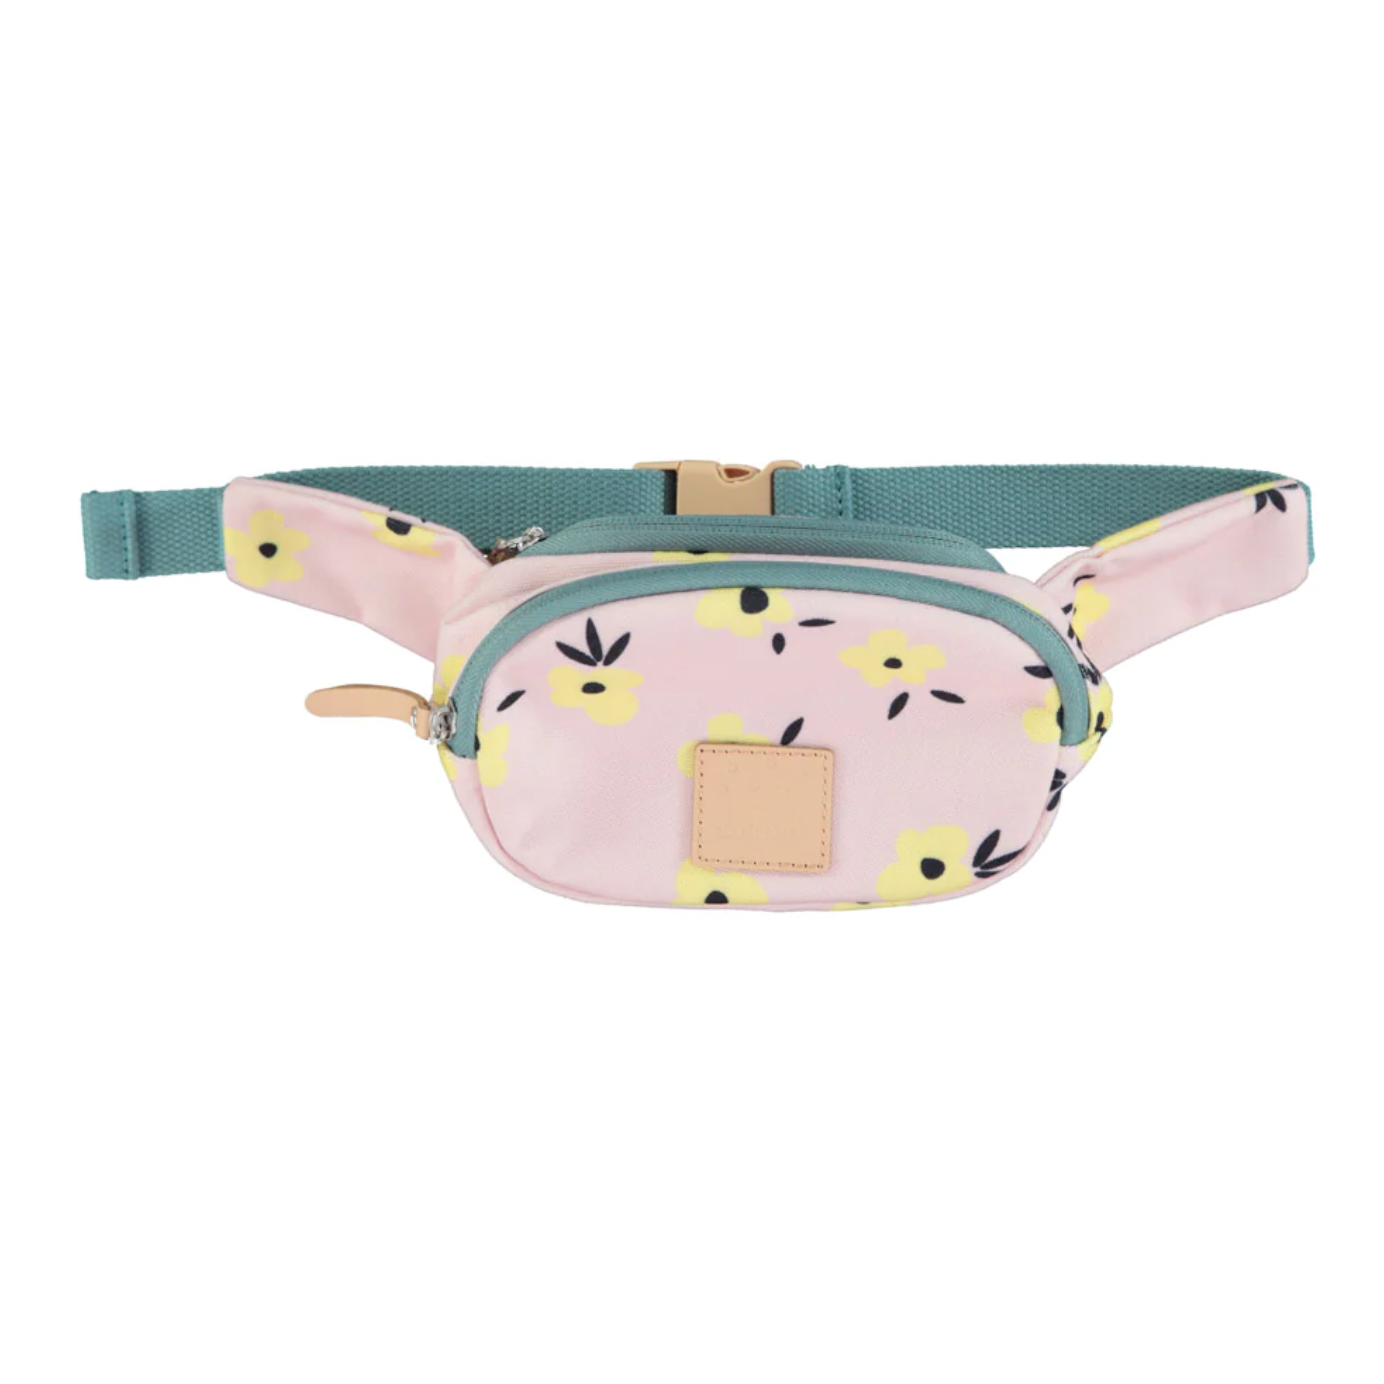 Belt bag for <tc>kids</tc> - Pale pink and yellow flowers